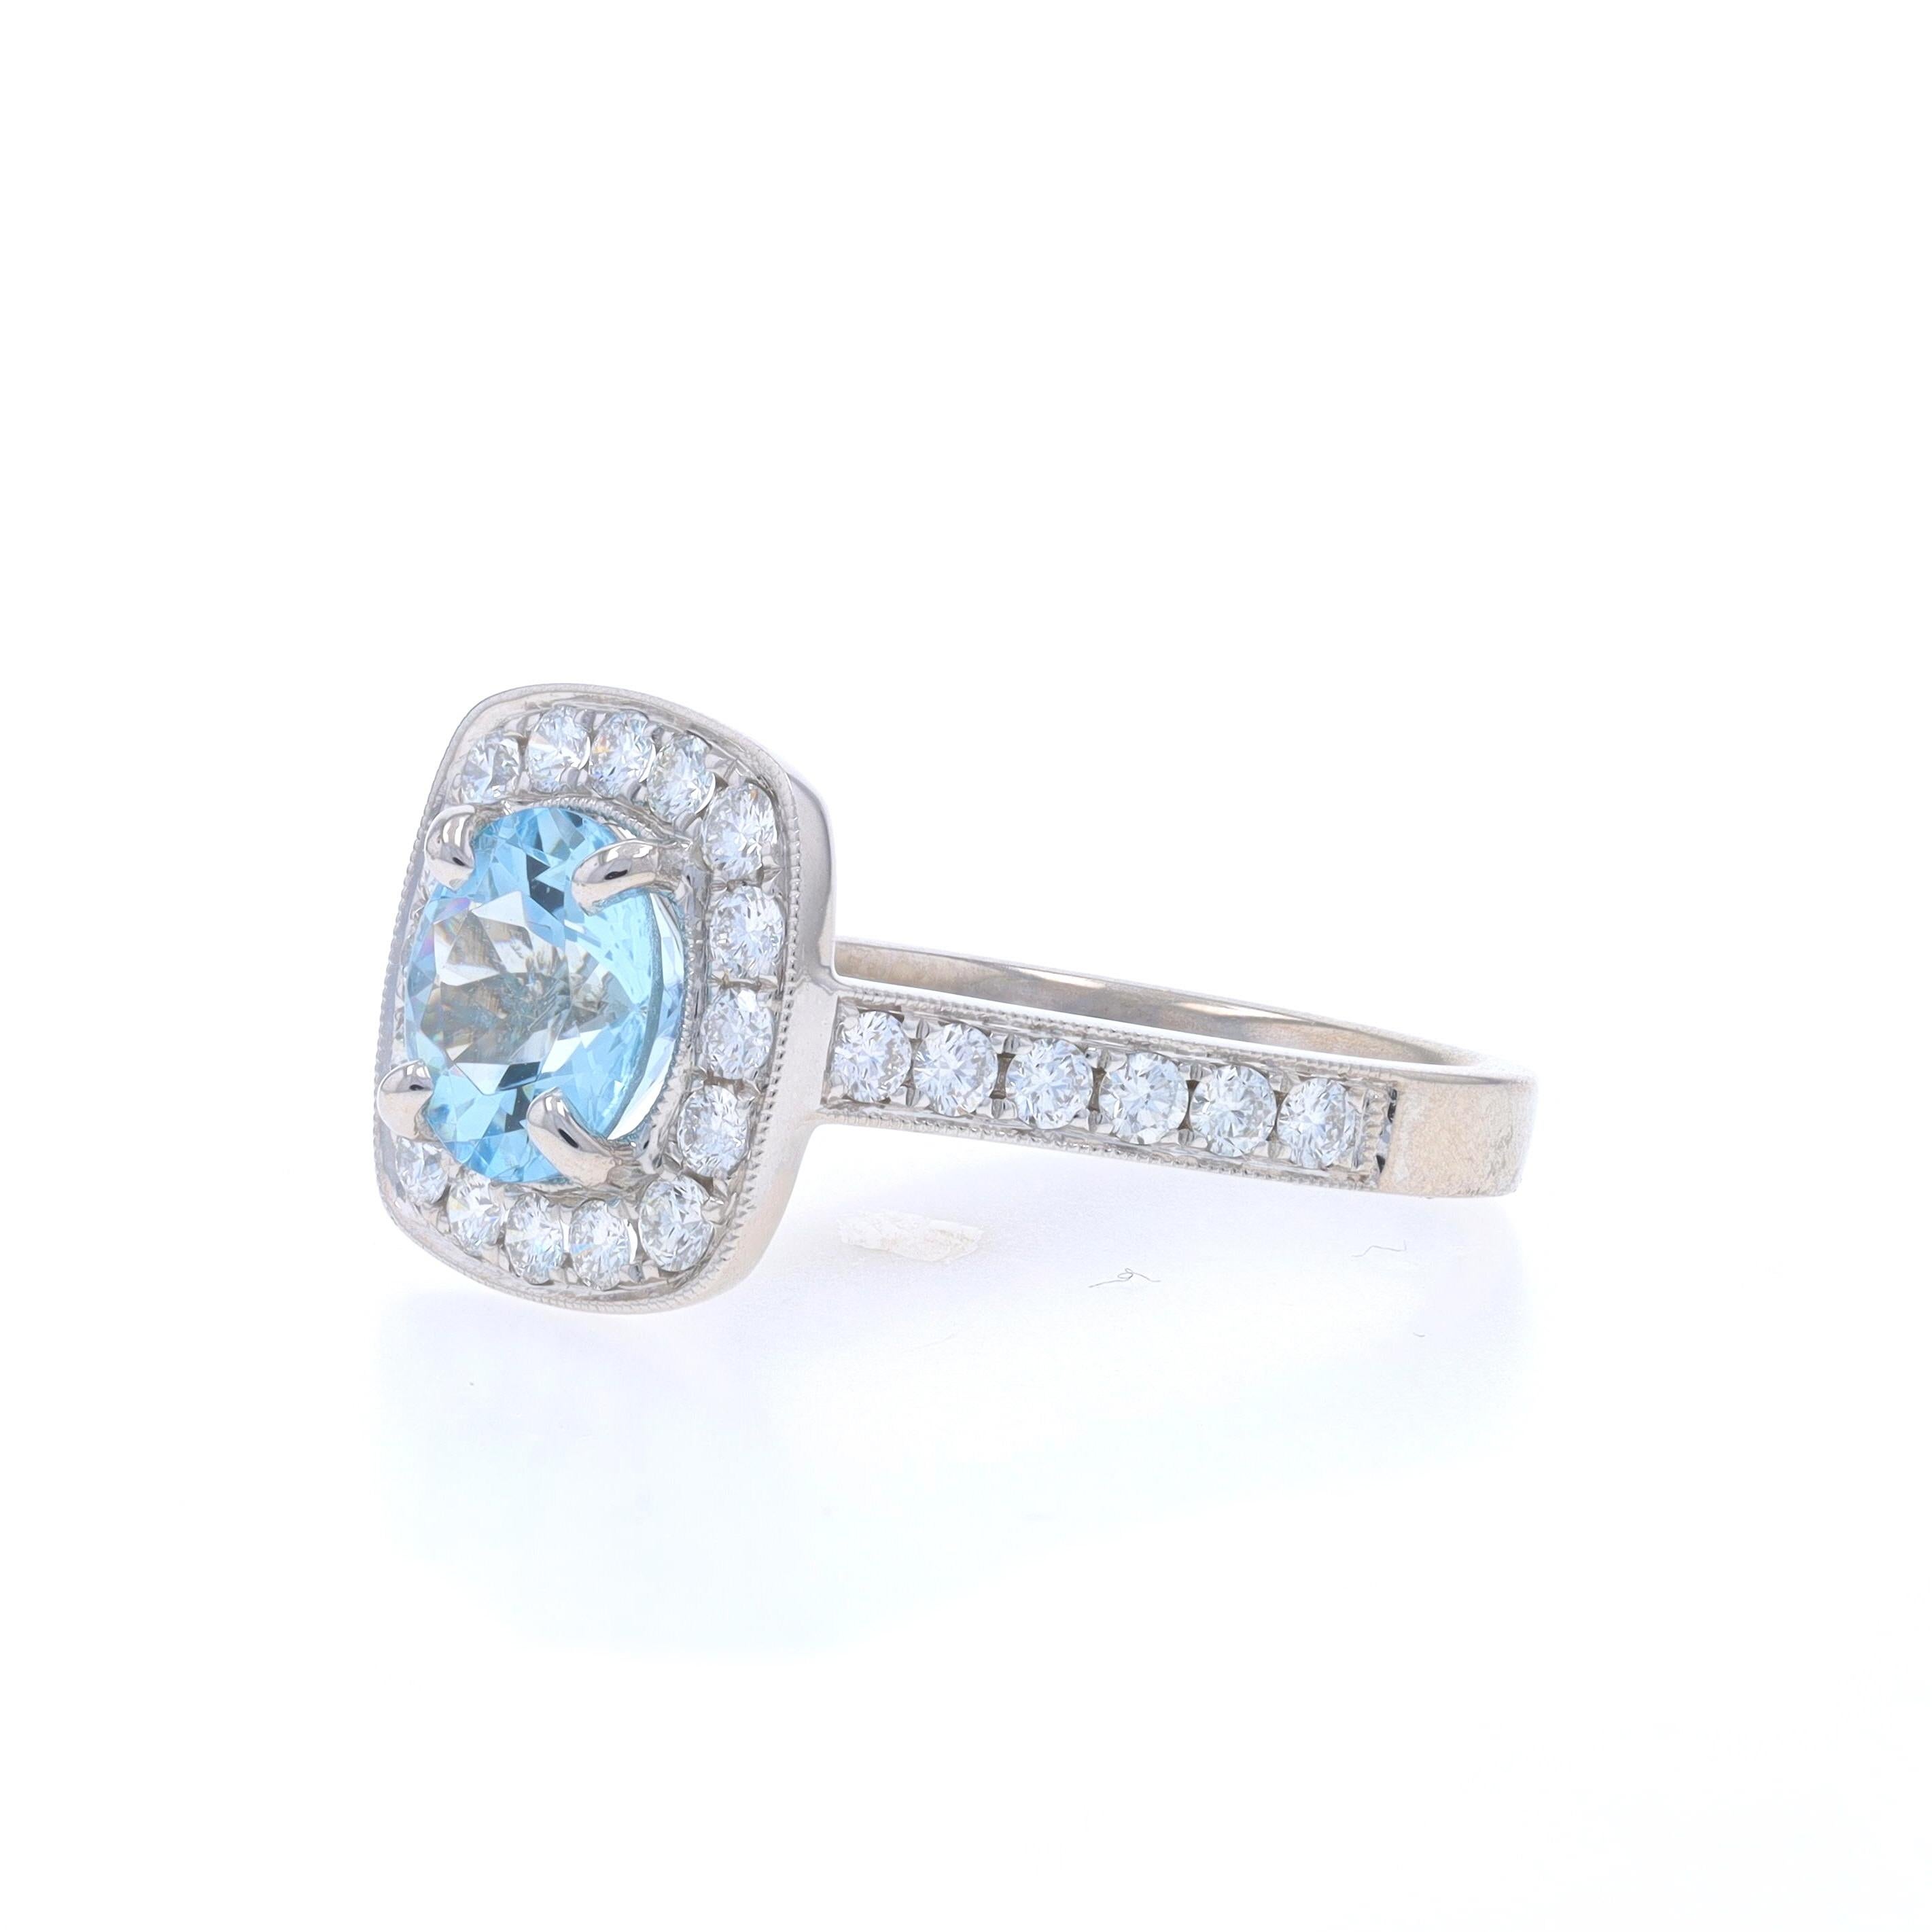 White Gold Aquamarine Diamond Halo Ring 14k Round Portuguese 2.54ctw Engagement In New Condition For Sale In Greensboro, NC